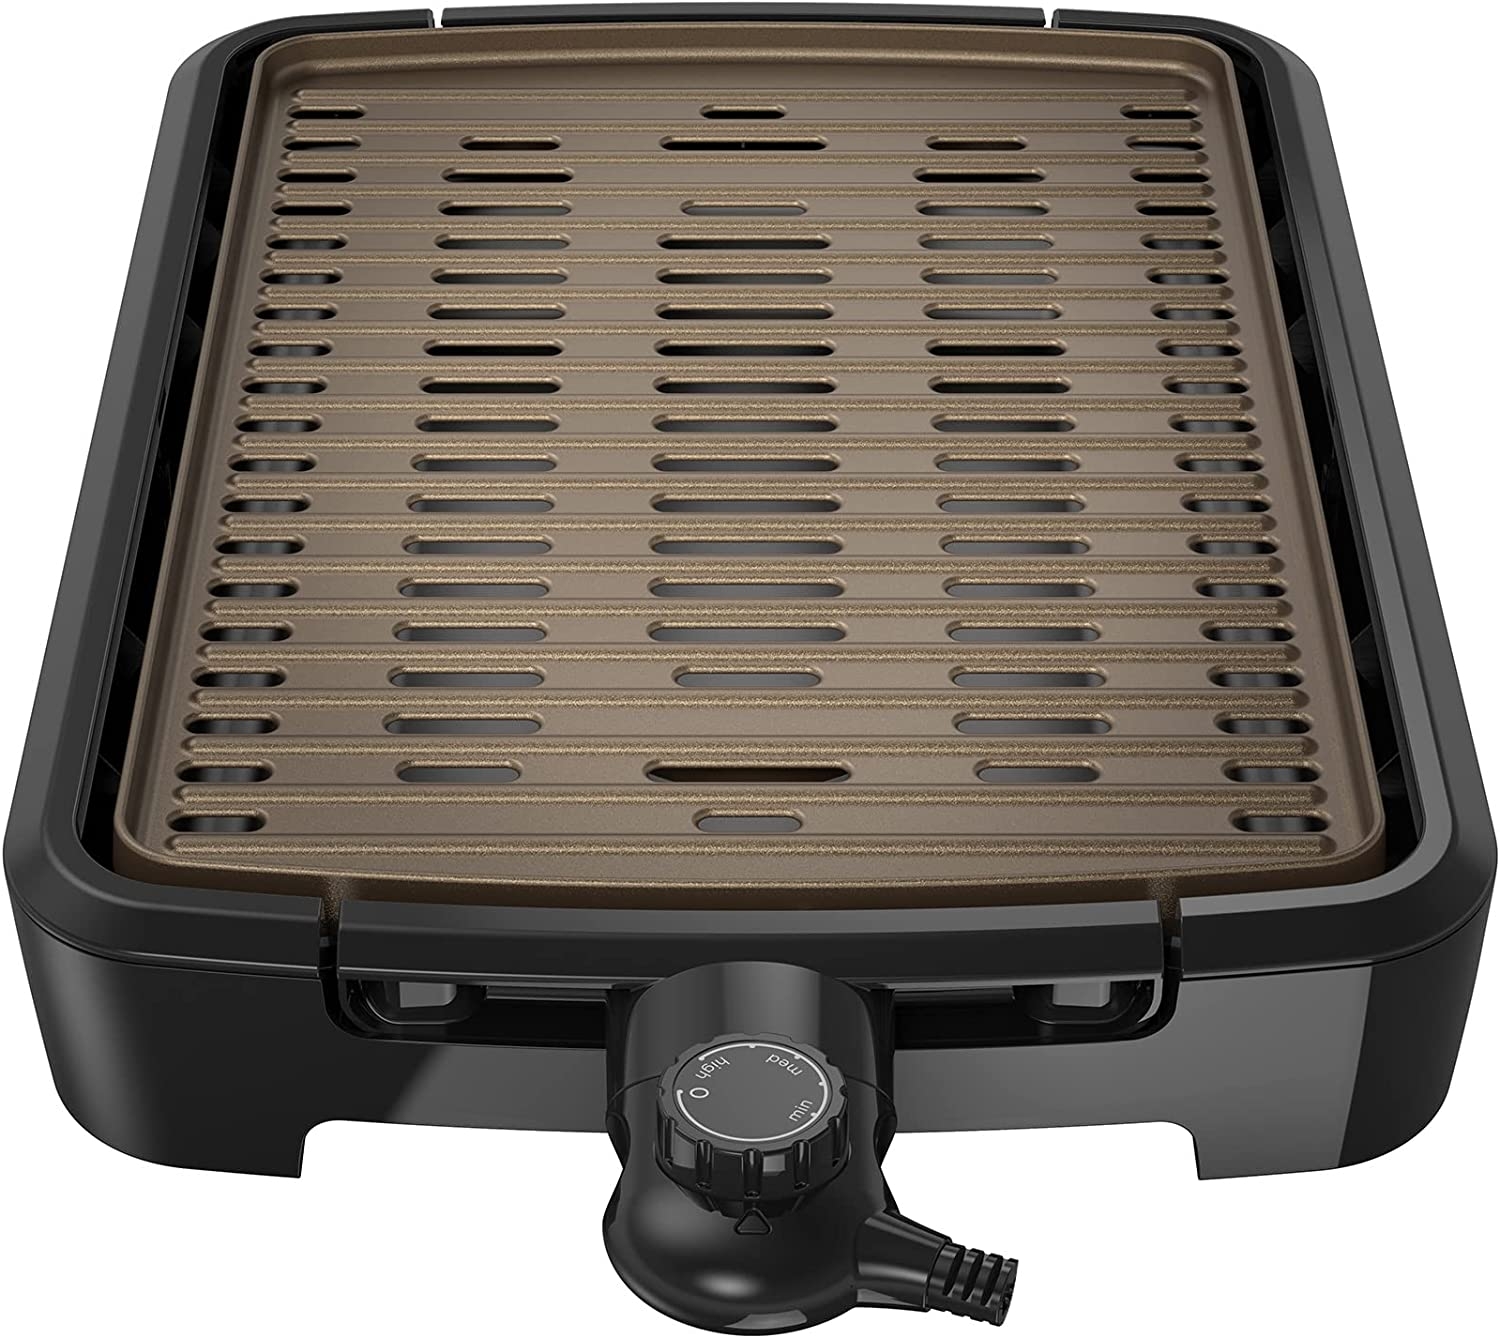 George Foreman GFS0090SB Open Grate Smokeless Grill, Black, Family Size Import To Shop ×Product customization General